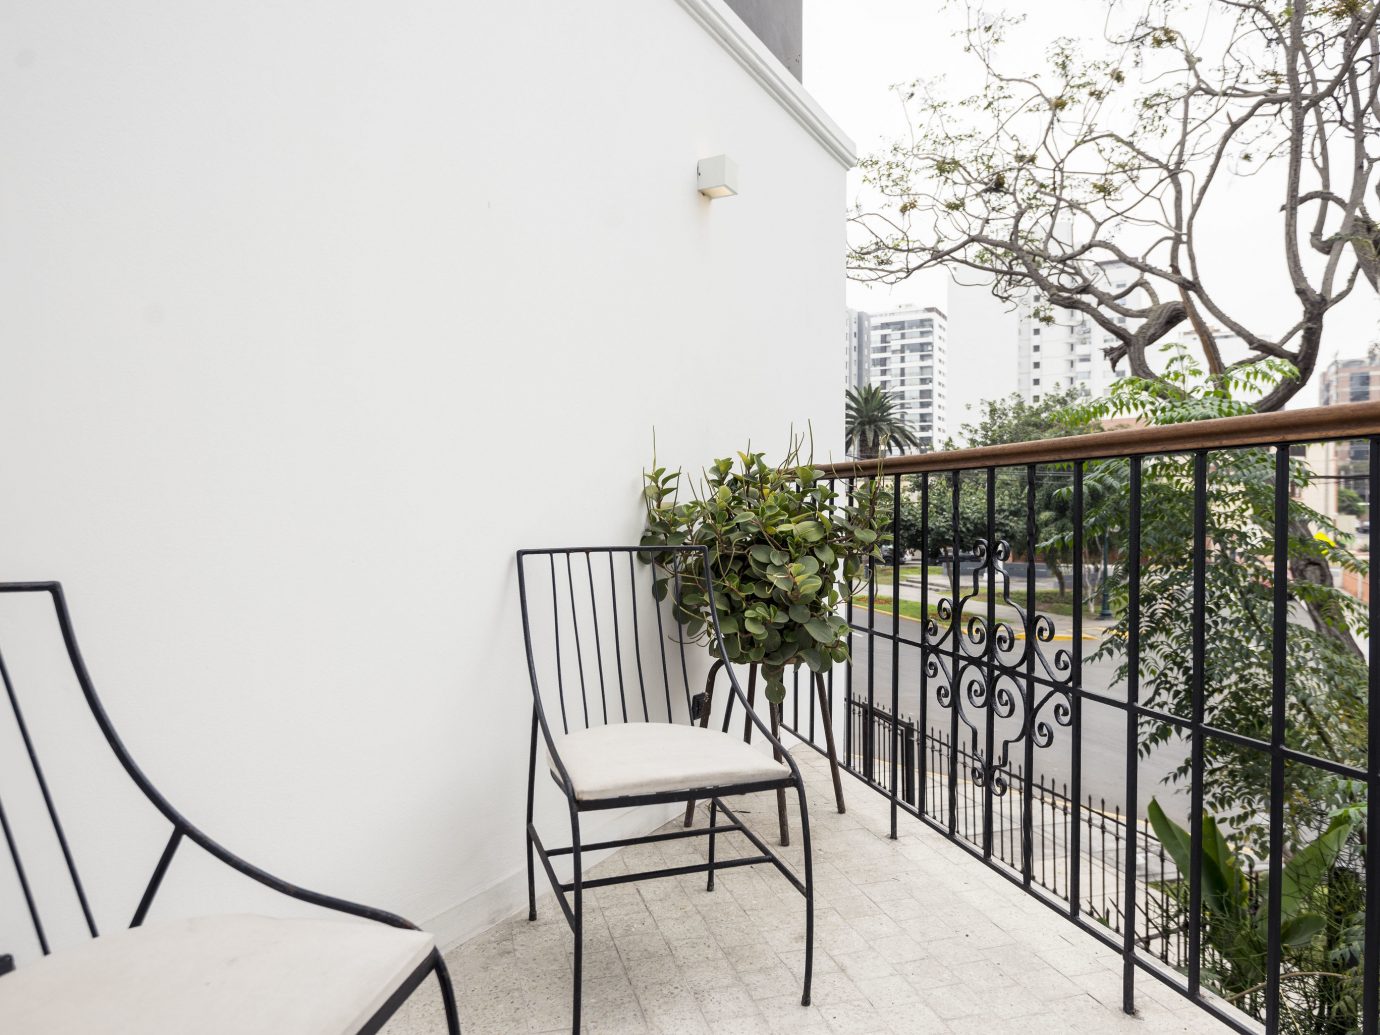 Boutique Hotels Hotels property handrail building Balcony home house real estate apartment chair tree outdoor structure stairs estate window furniture Fence plant area